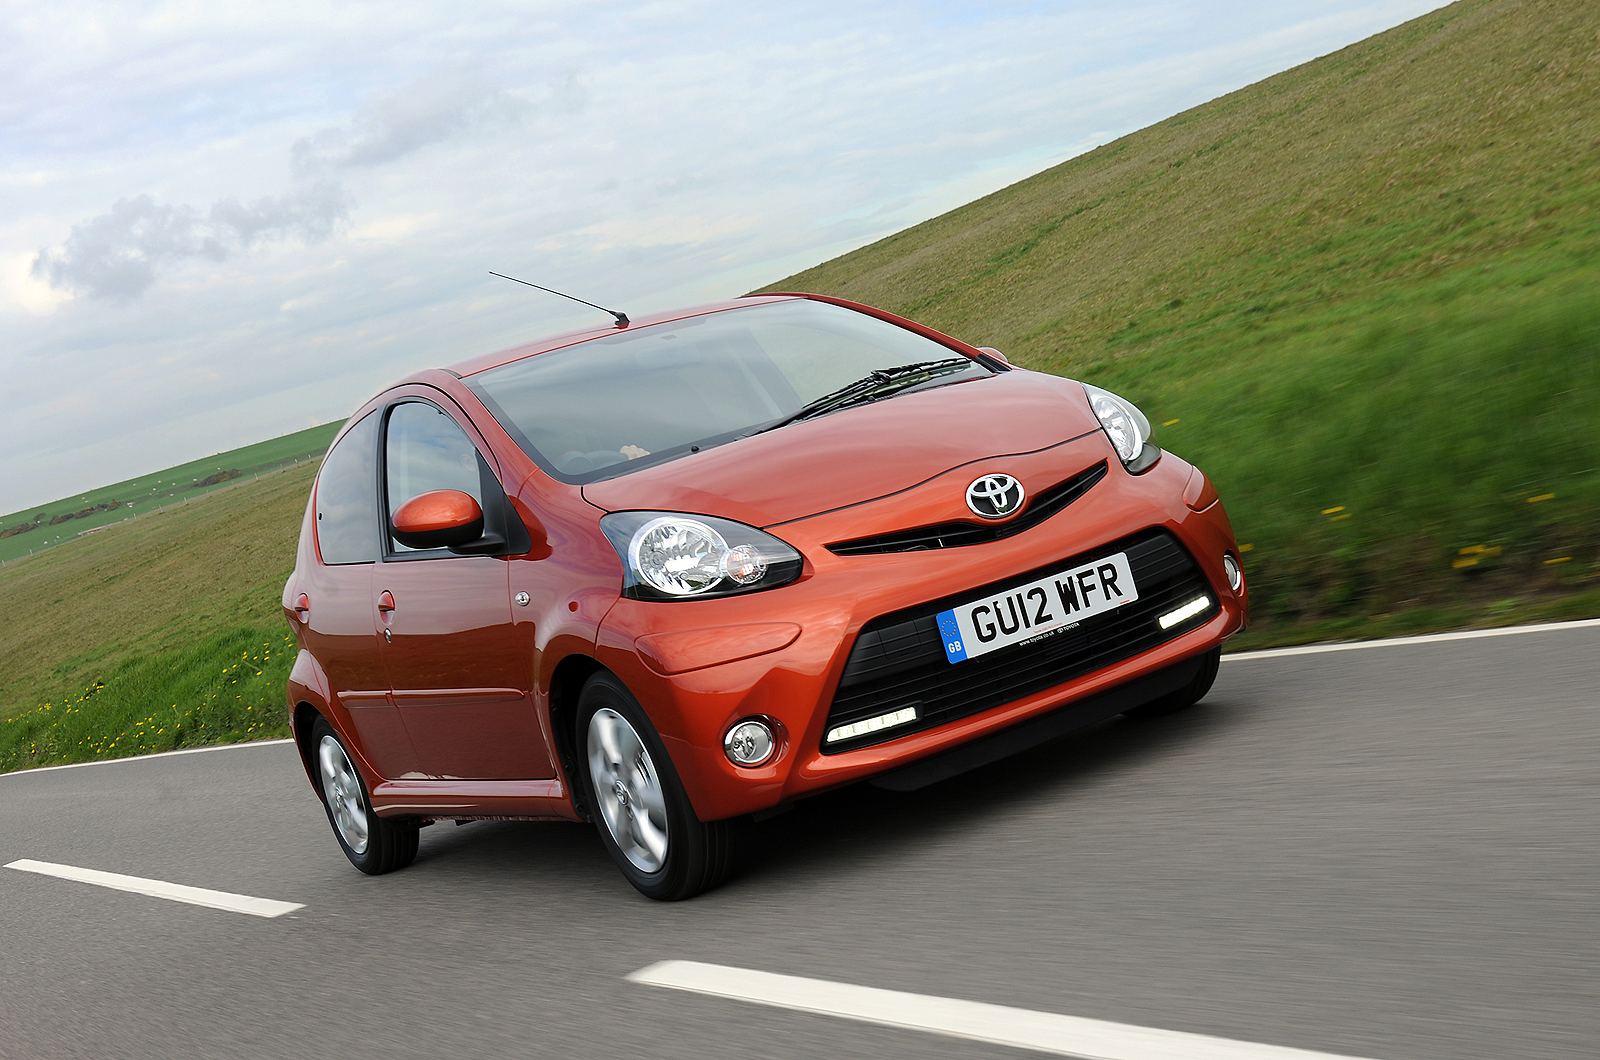 Toyota Aygo 1.0 Fire A/C first UK drive